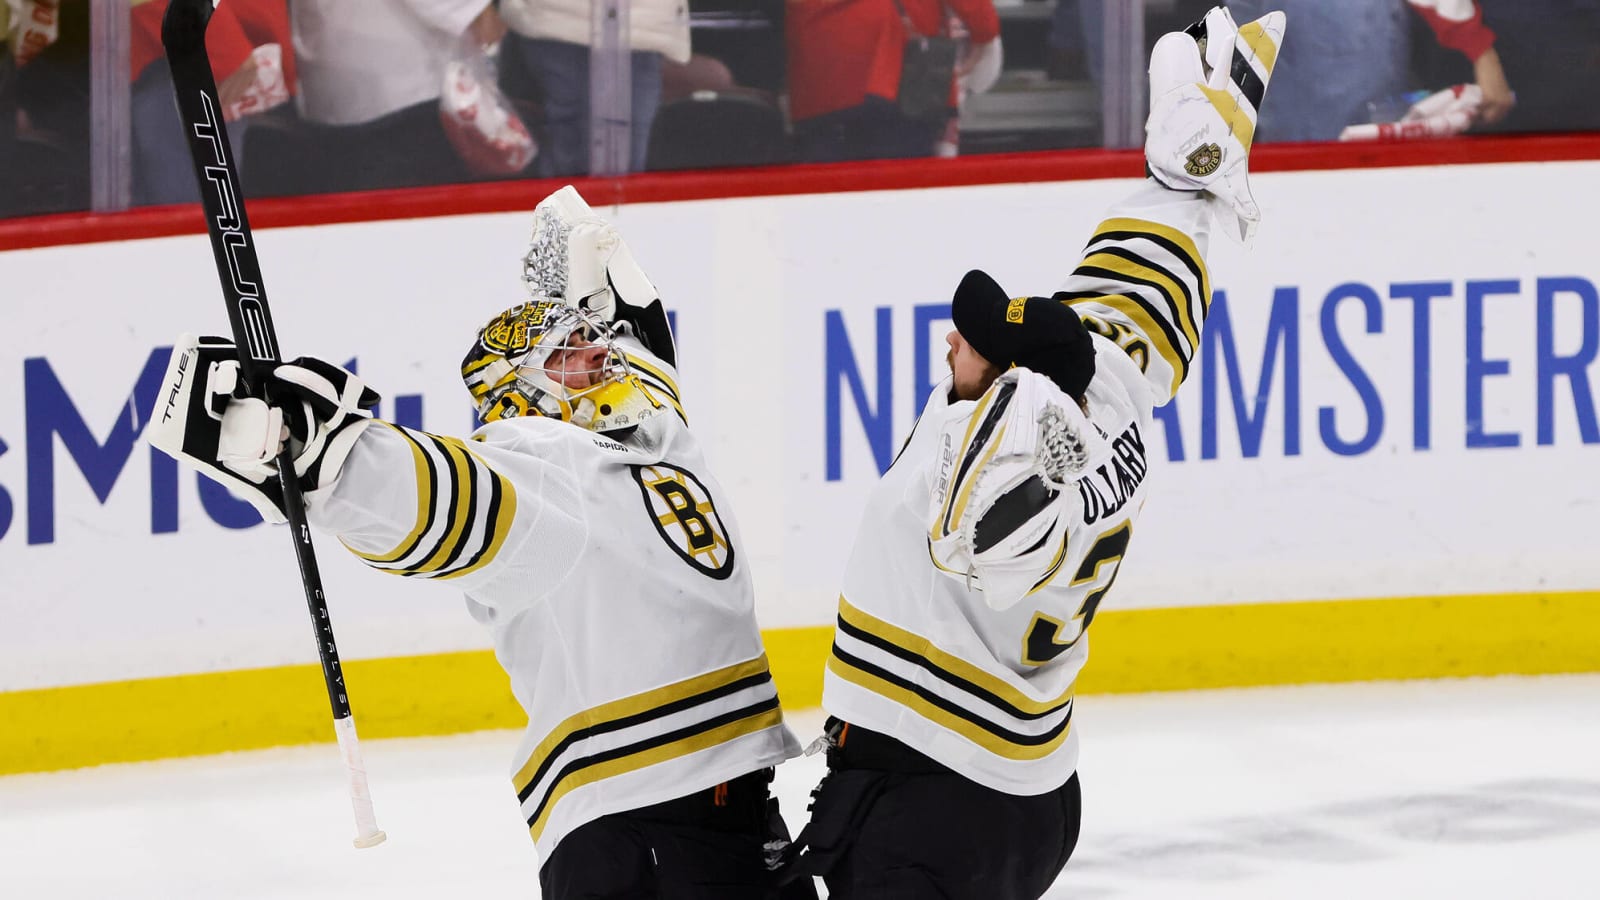 Bruins Drop Rhetoric Against Panthers, Focus on Winning the Game